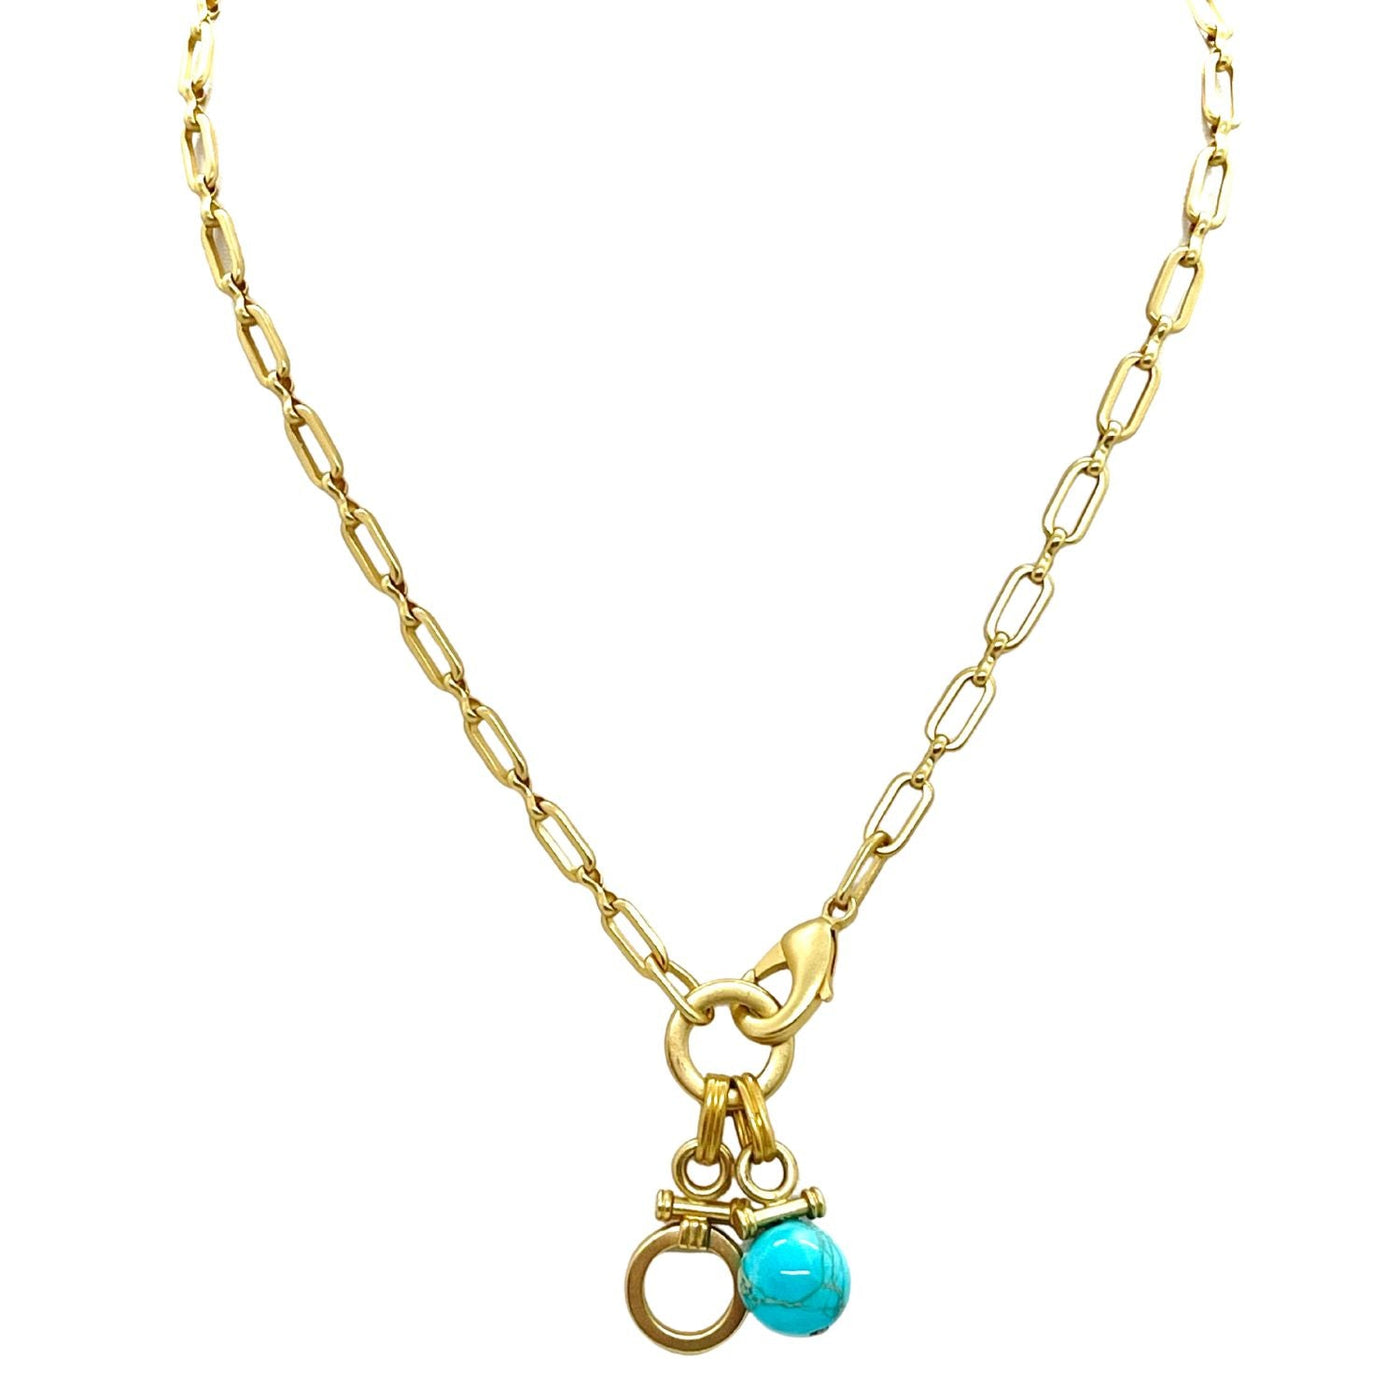 Turquoise Aqua Terra And Matte Gold Circle Double Charm Necklace